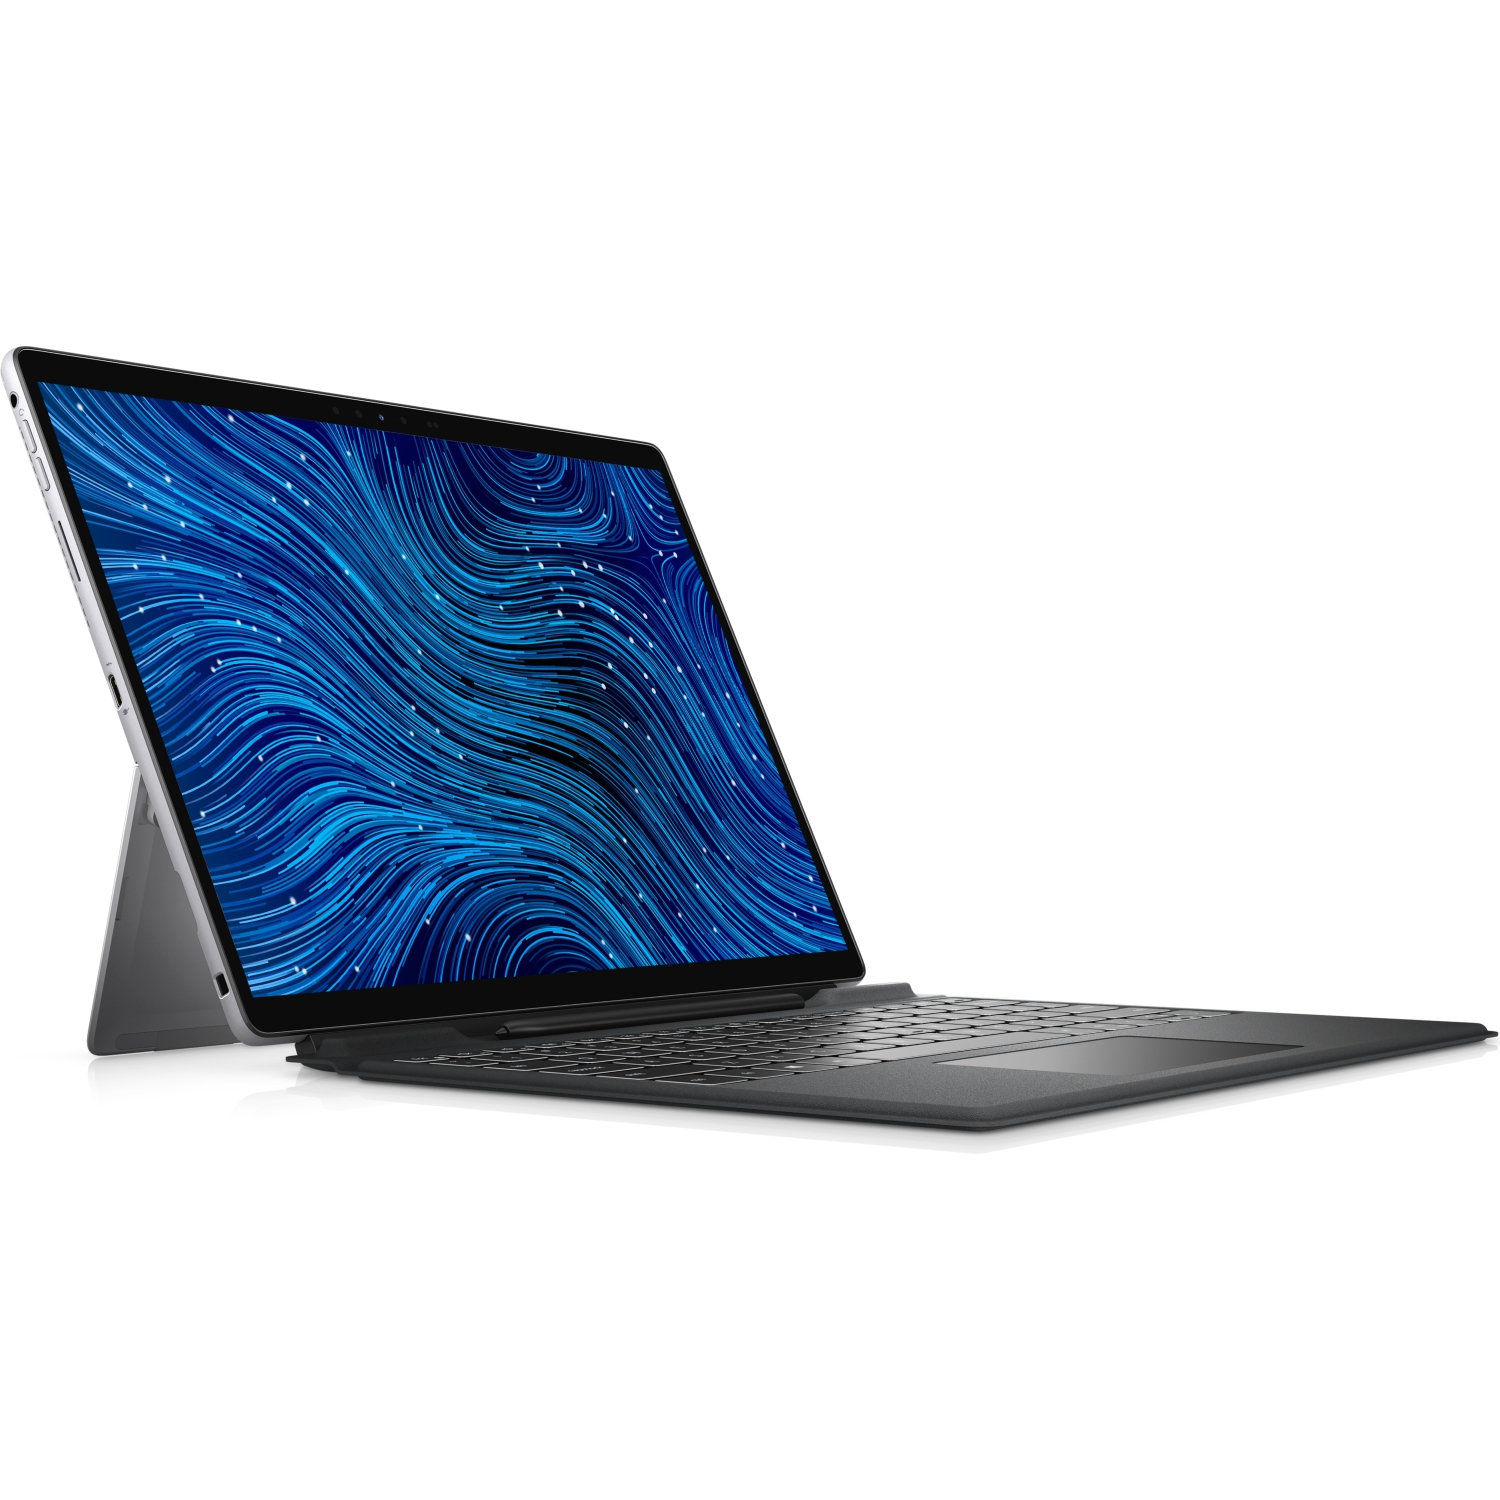 Refurbished (Excellent) – Dell Latitude 7000 7320 Detachable 2-in-1 (2021) | 13" FHD+ Touch | Core i5 - 256GB SSD - 8GB RAM | 4 Cores @ 4.2 GHz - 11th Gen CPU